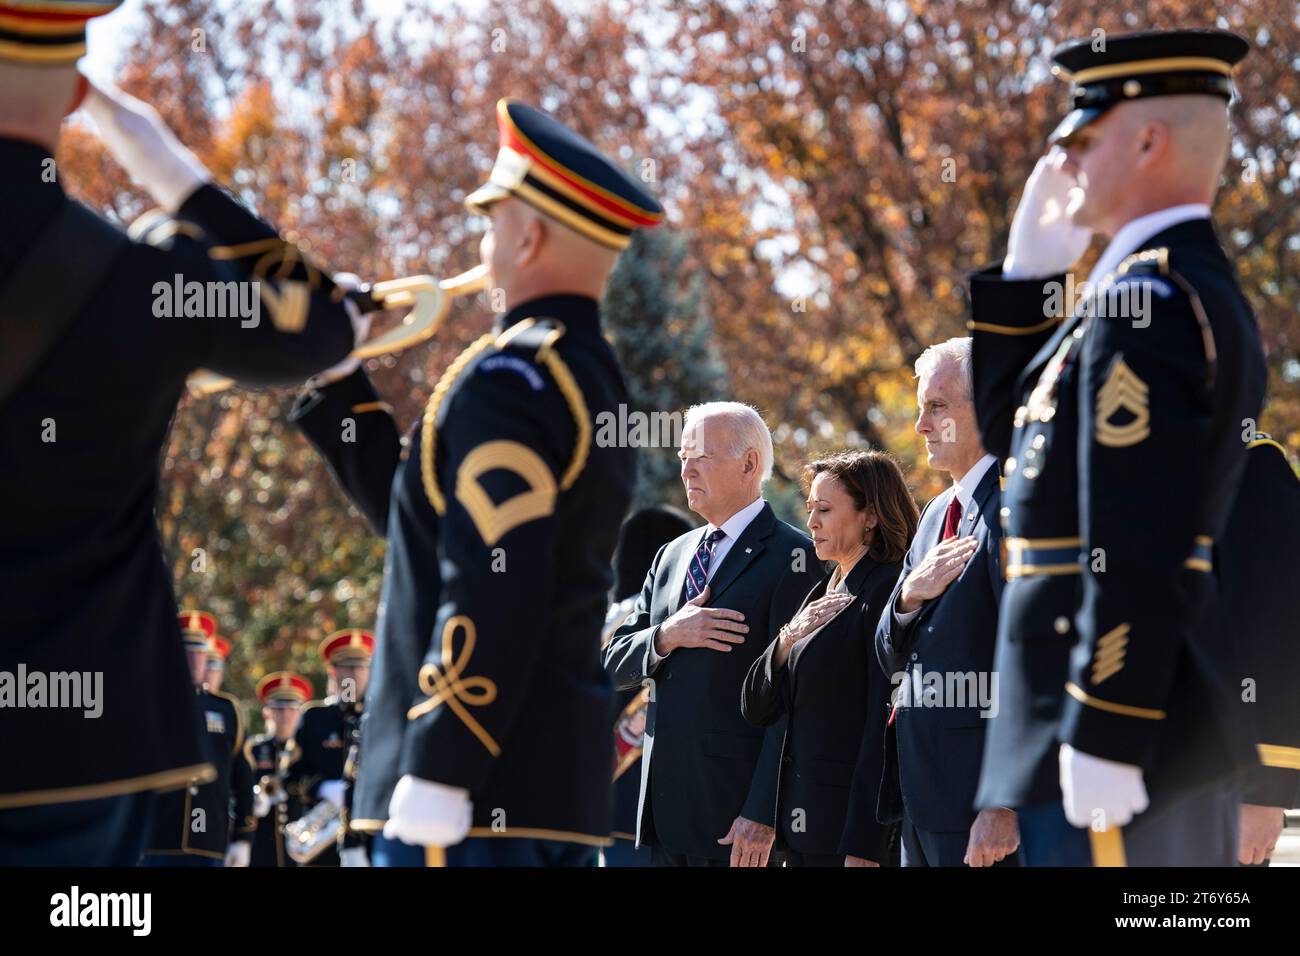 Arlington, United States. 11 November, 2023. Left to right: U.S President Joe Biden, Vice President Kamala Harris, and Secretary of Veterans Affairs Denis McDonough render honors at the Tomb of the Unknown Soldier during the 70th National Veterans Day Observance at Arlington National Cemetery, November 11, 2023 in Arlington, Virginia.  Credit: Elizabeth Fraser/US Army Photo/Alamy Live News Stock Photo